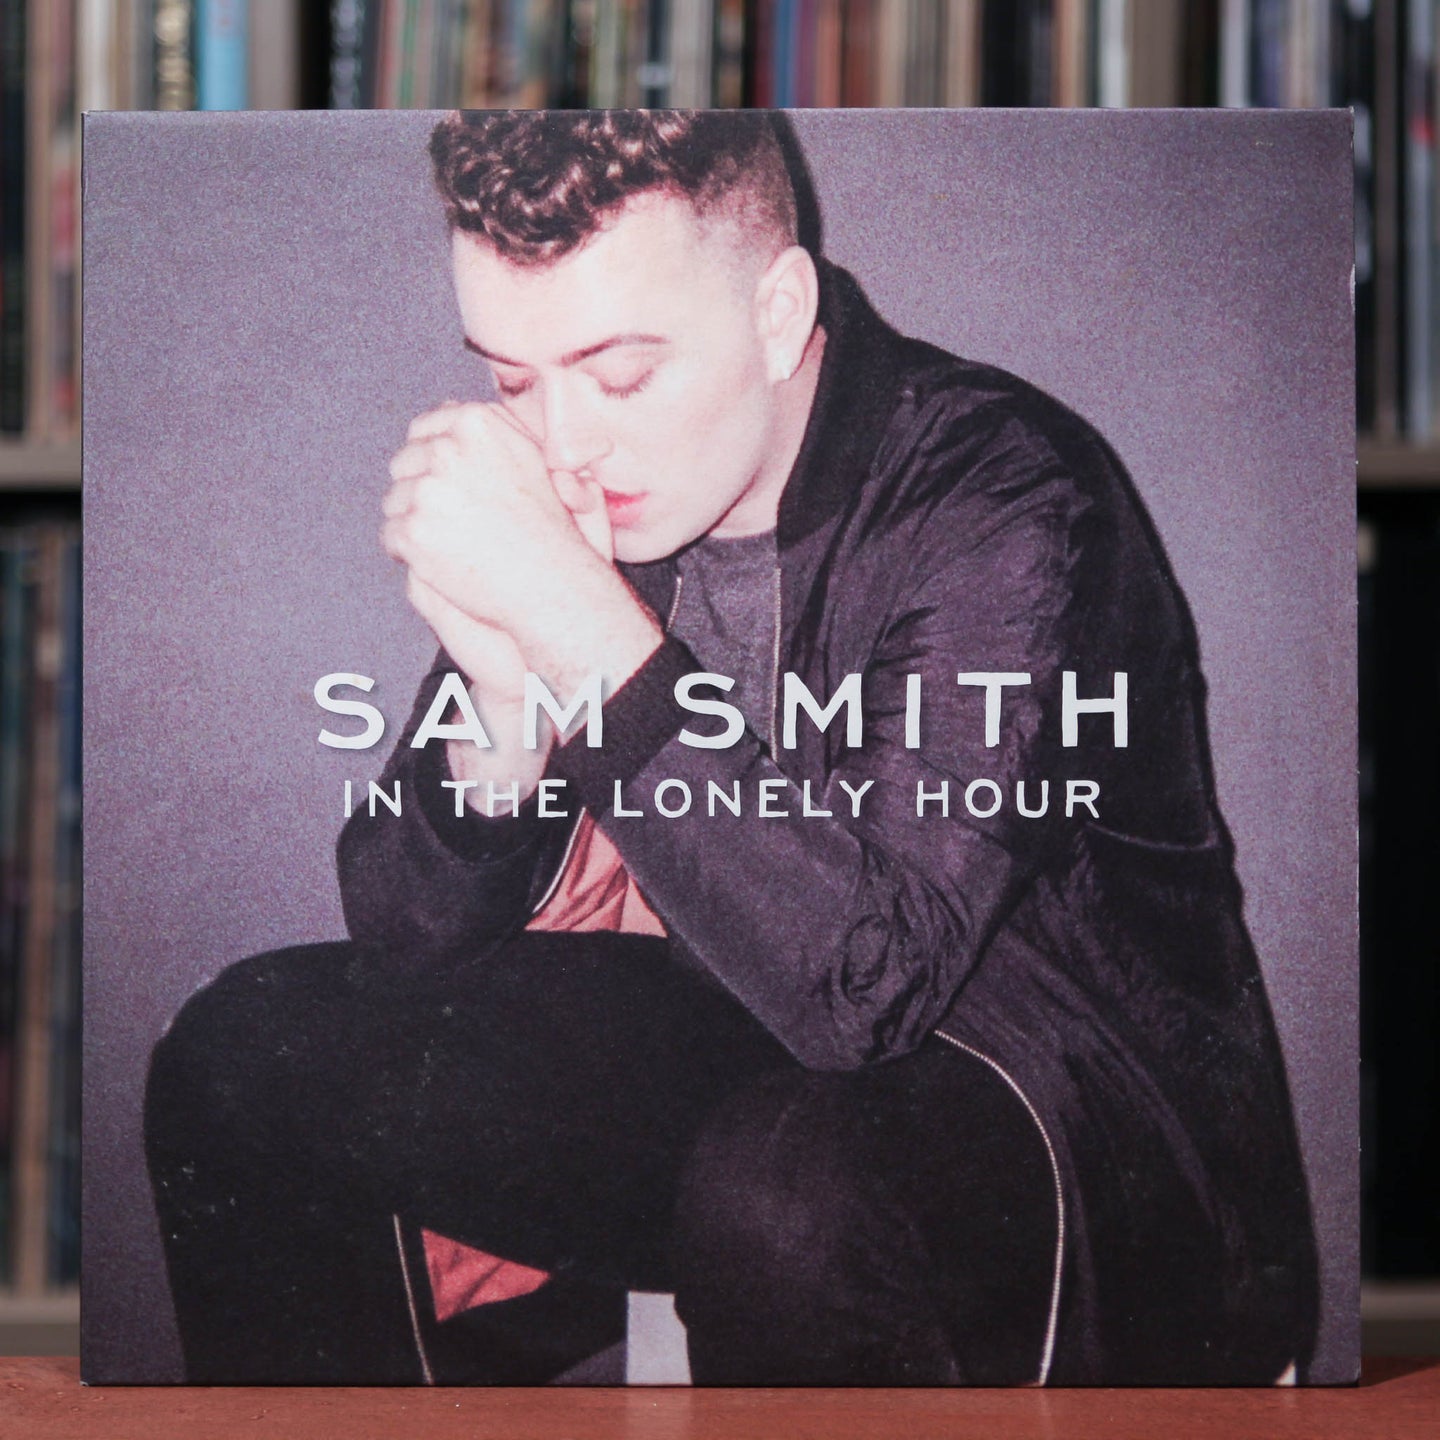 Sam Smith - In the Lonely Hour - 2014 Capitol, VG+/VG+